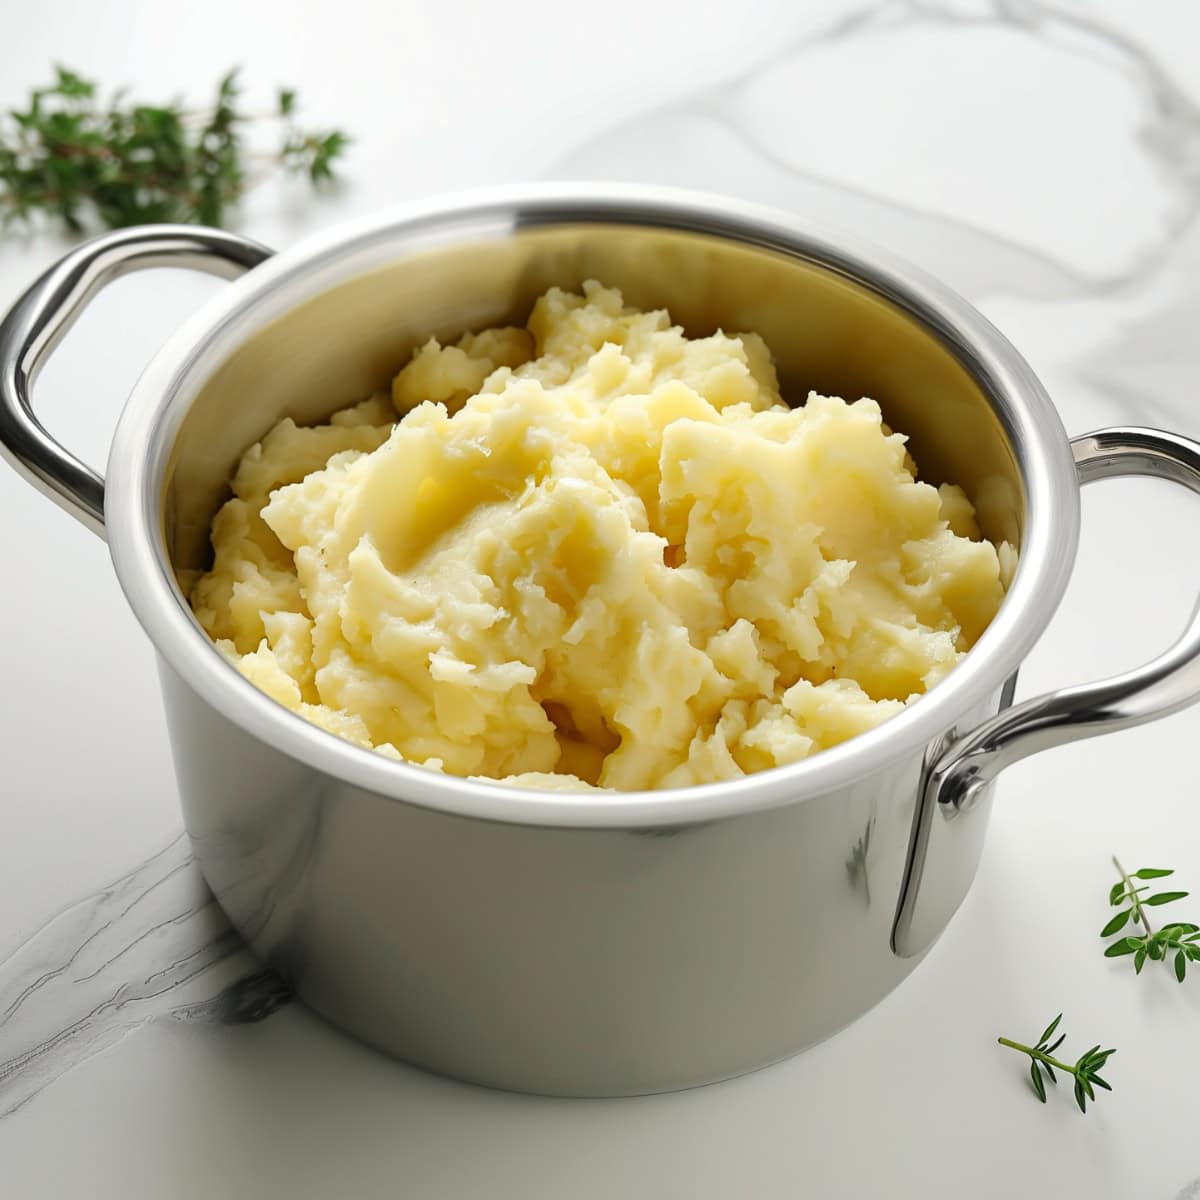 Mashed potatoes in a stainless pot on a marble top.